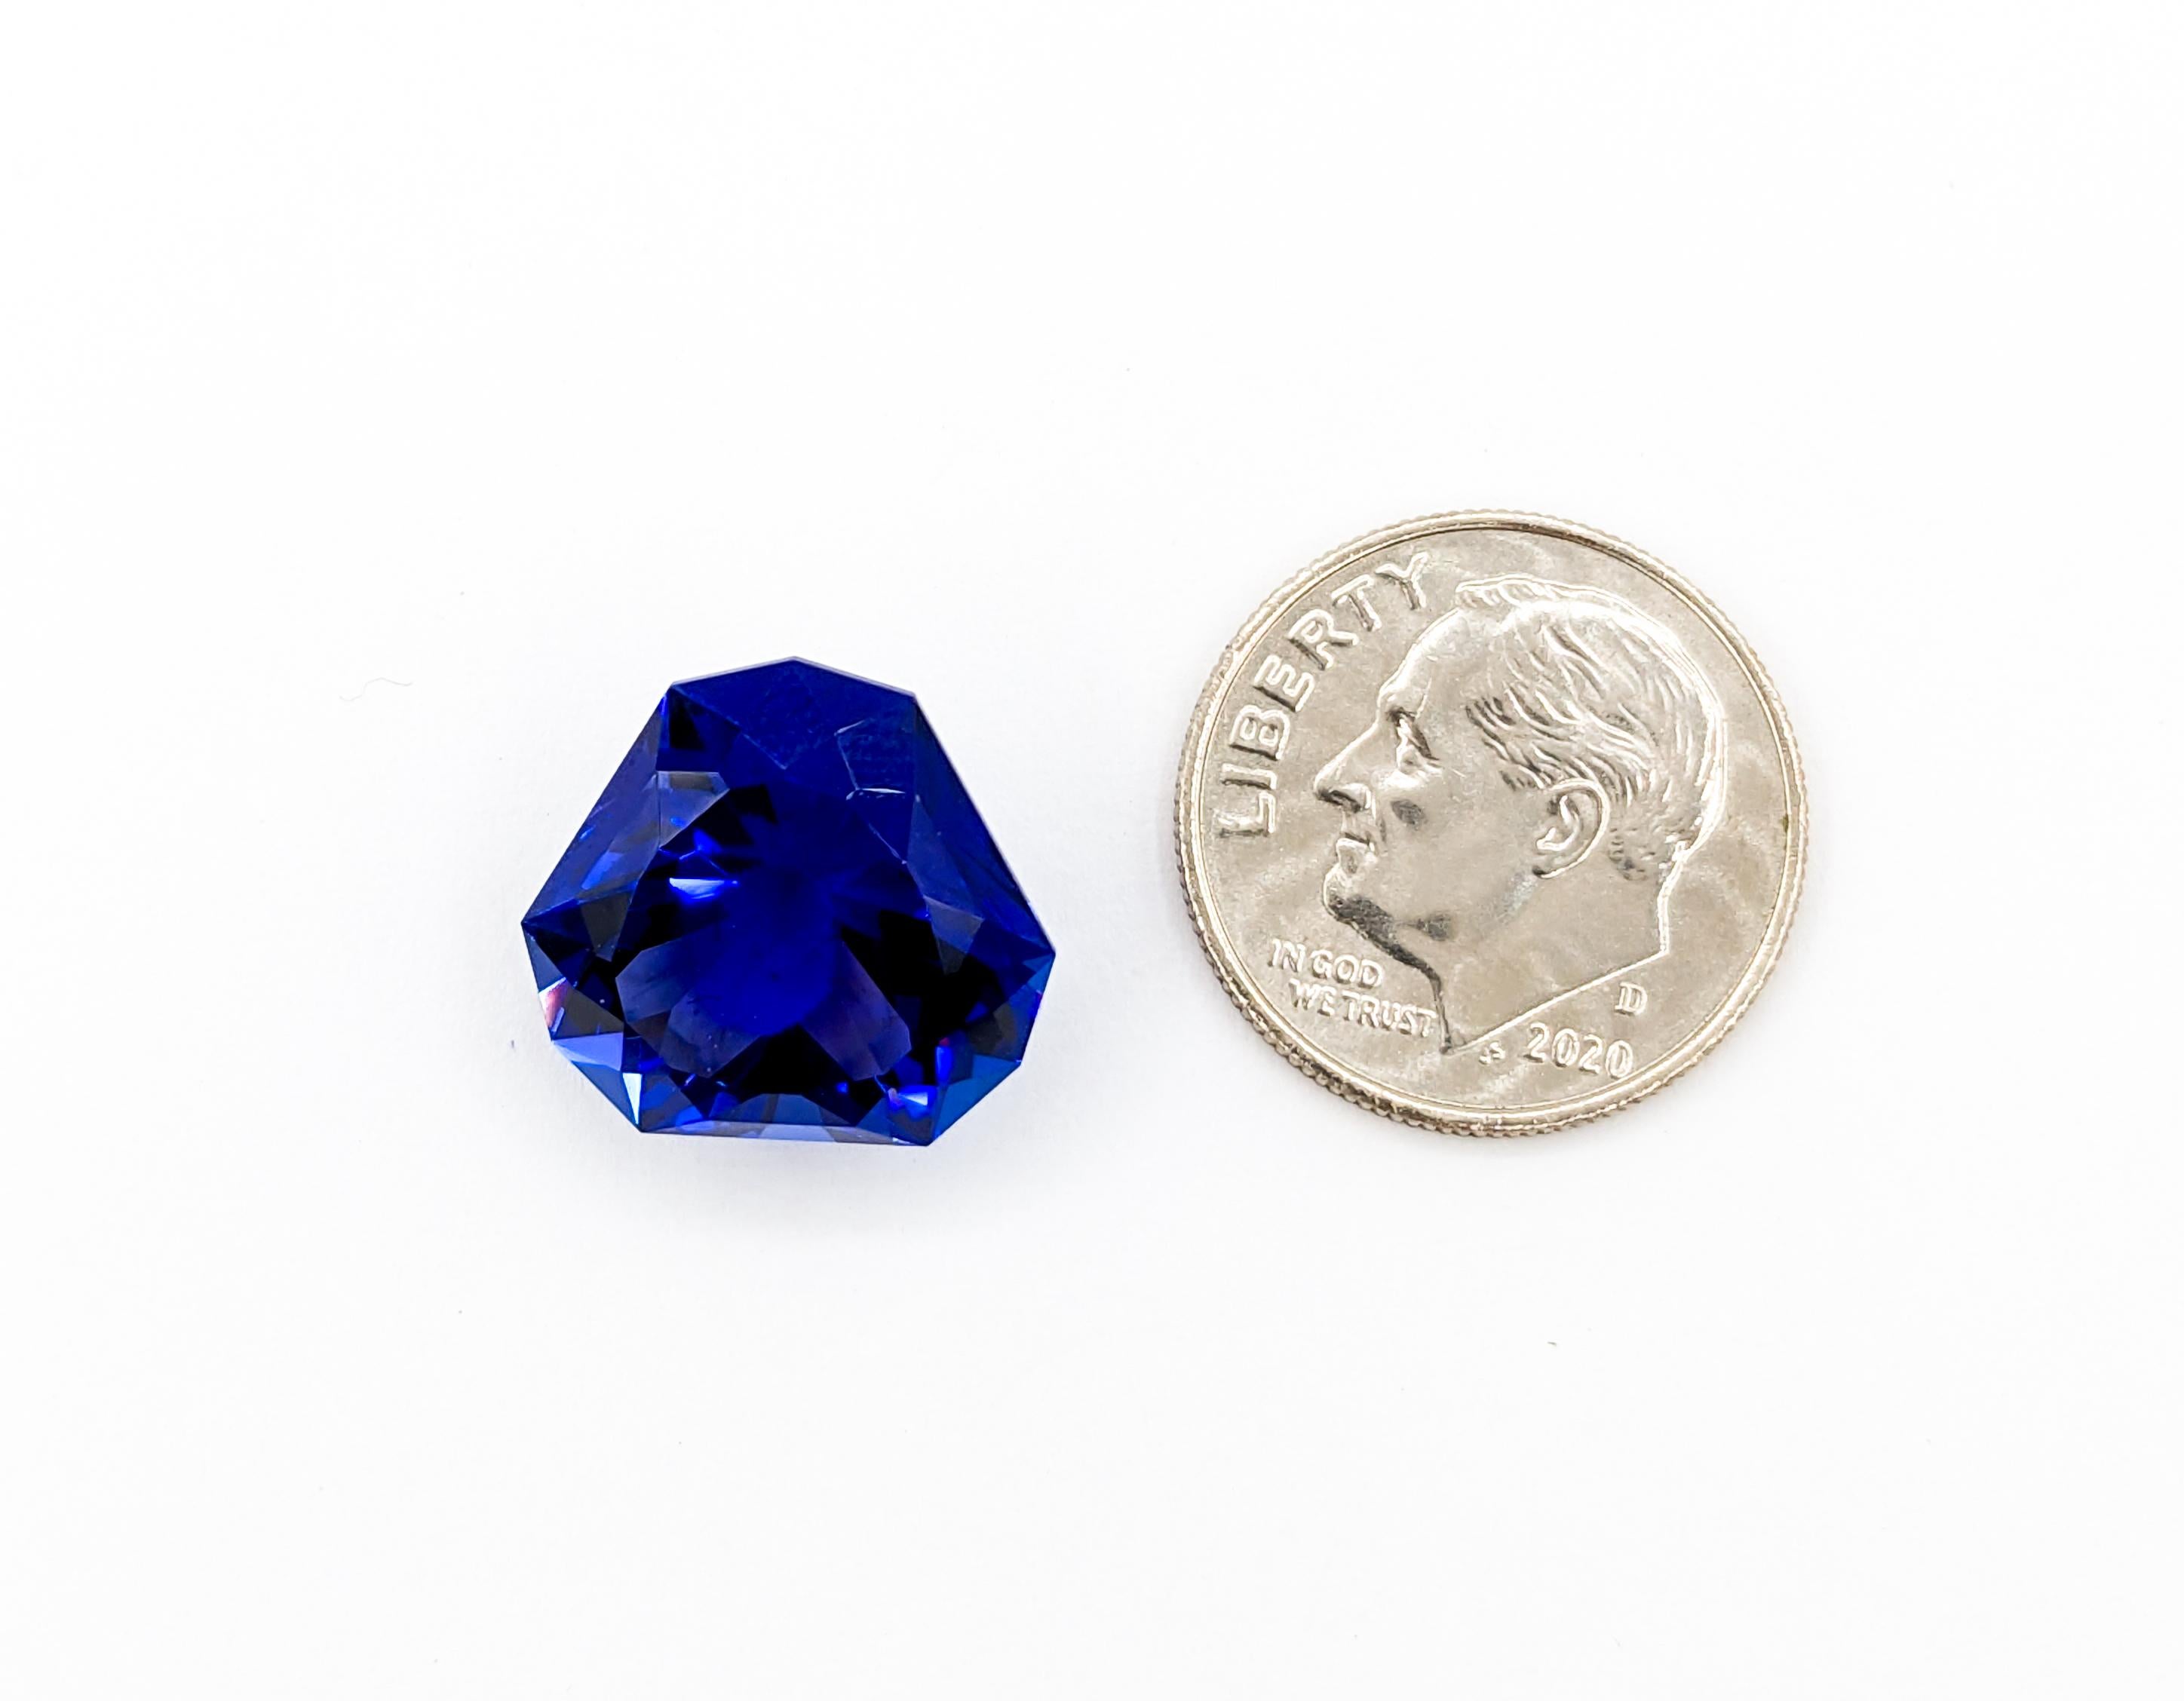 Dive into the allure of a pristine 10.17ct Tanzanite, backed by a GIA Report. This freshly sourced gem unveils a distinctive shield brilliant cut, emanating captivating shades of violet-blue as light graces its facets. Boasting dimensions of 13.41 x